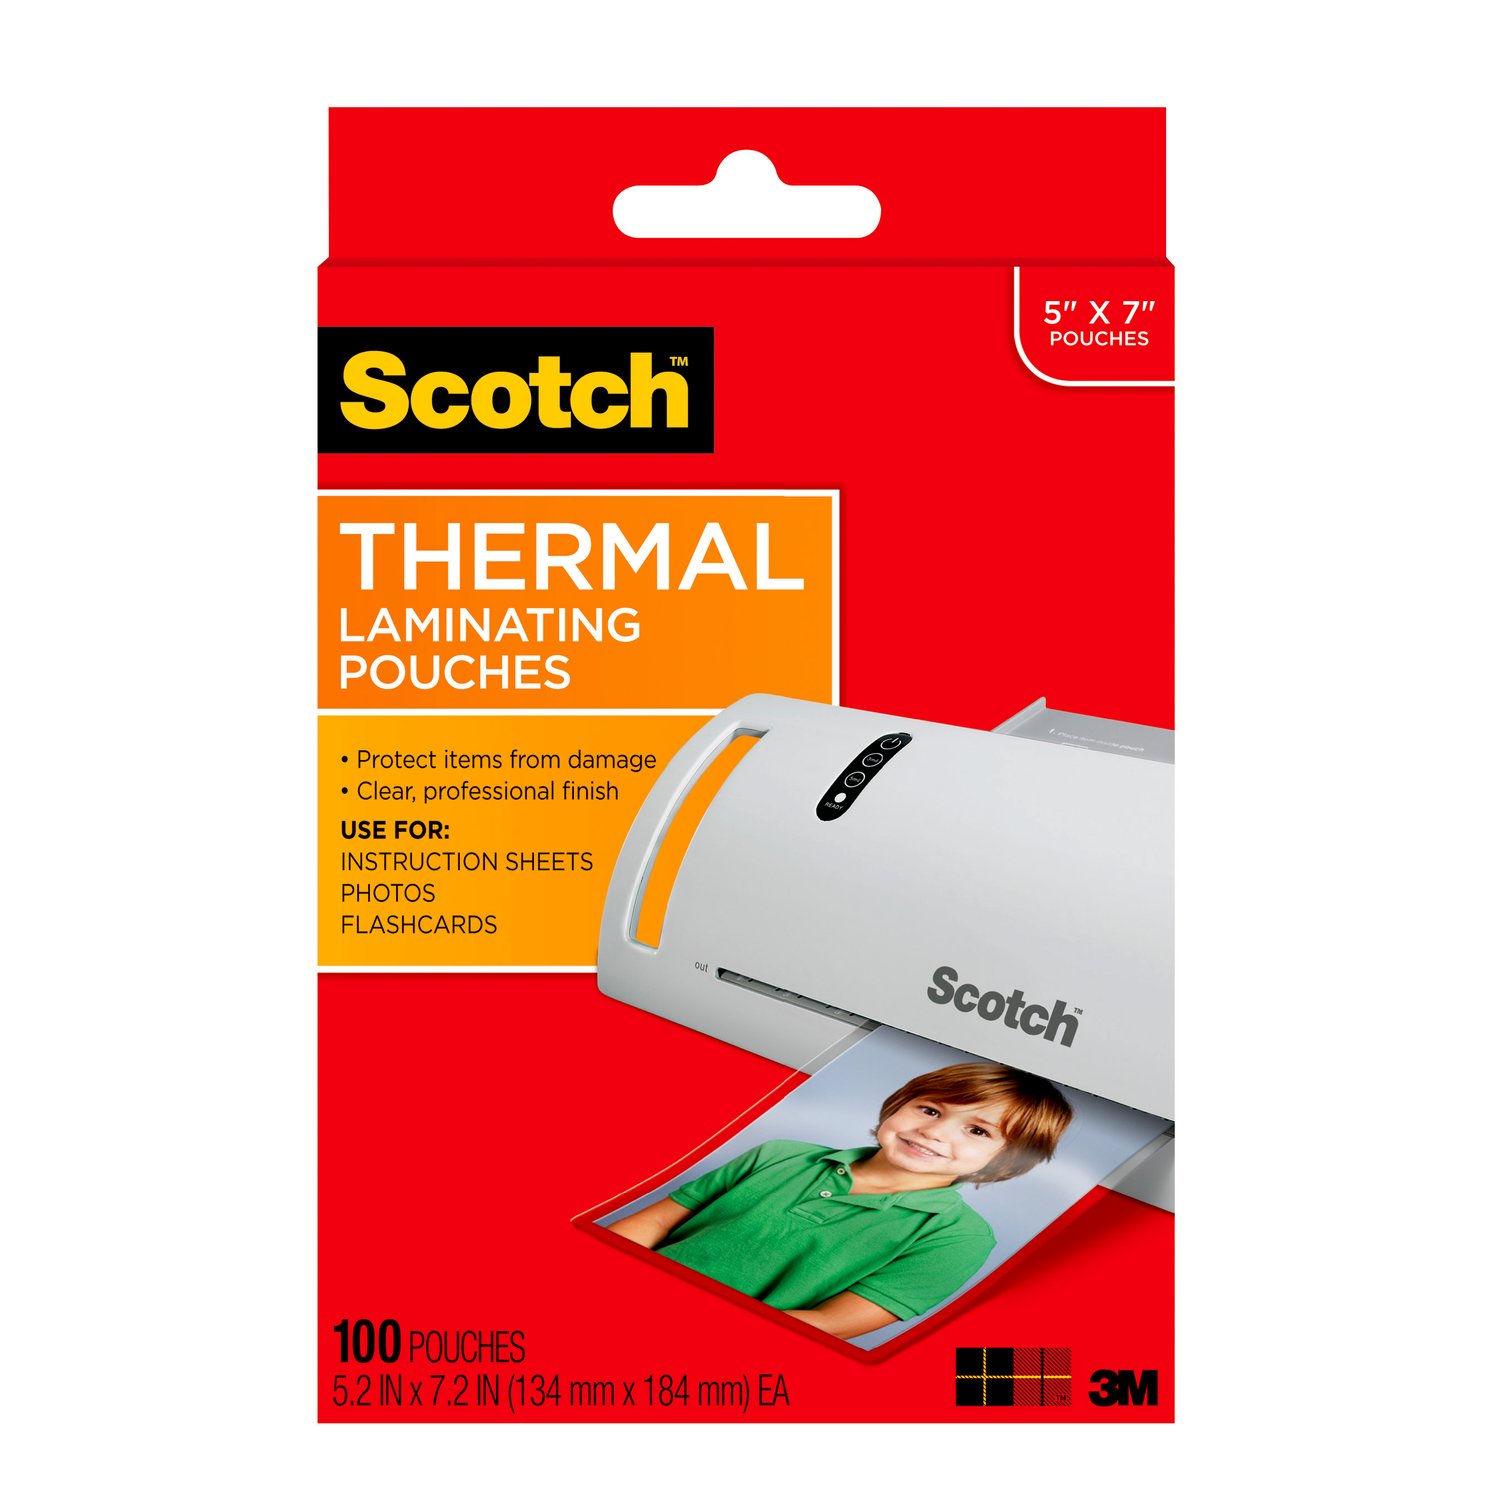 7010372376 - Scotch Thermal Pouches TP5903-100, for 5"x7" Photos 100 CT